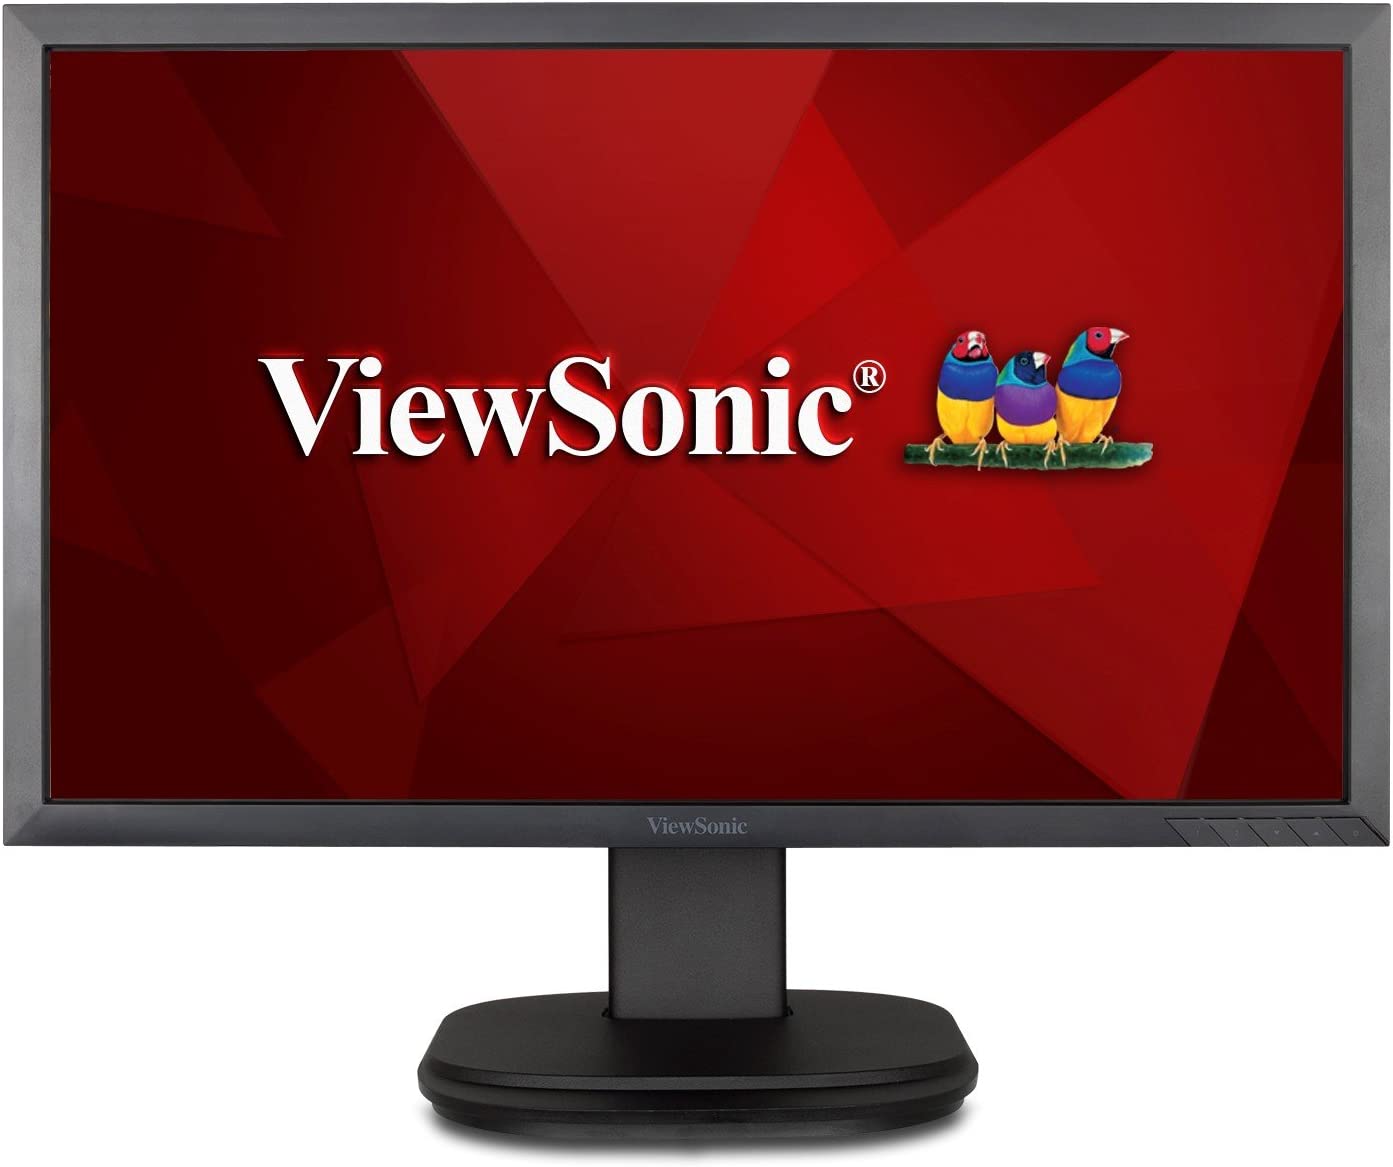 ViewSonic VG2239SMH-2-R 22" LCD Ergonomic Monitor for Home and Office - Certified Refurbished